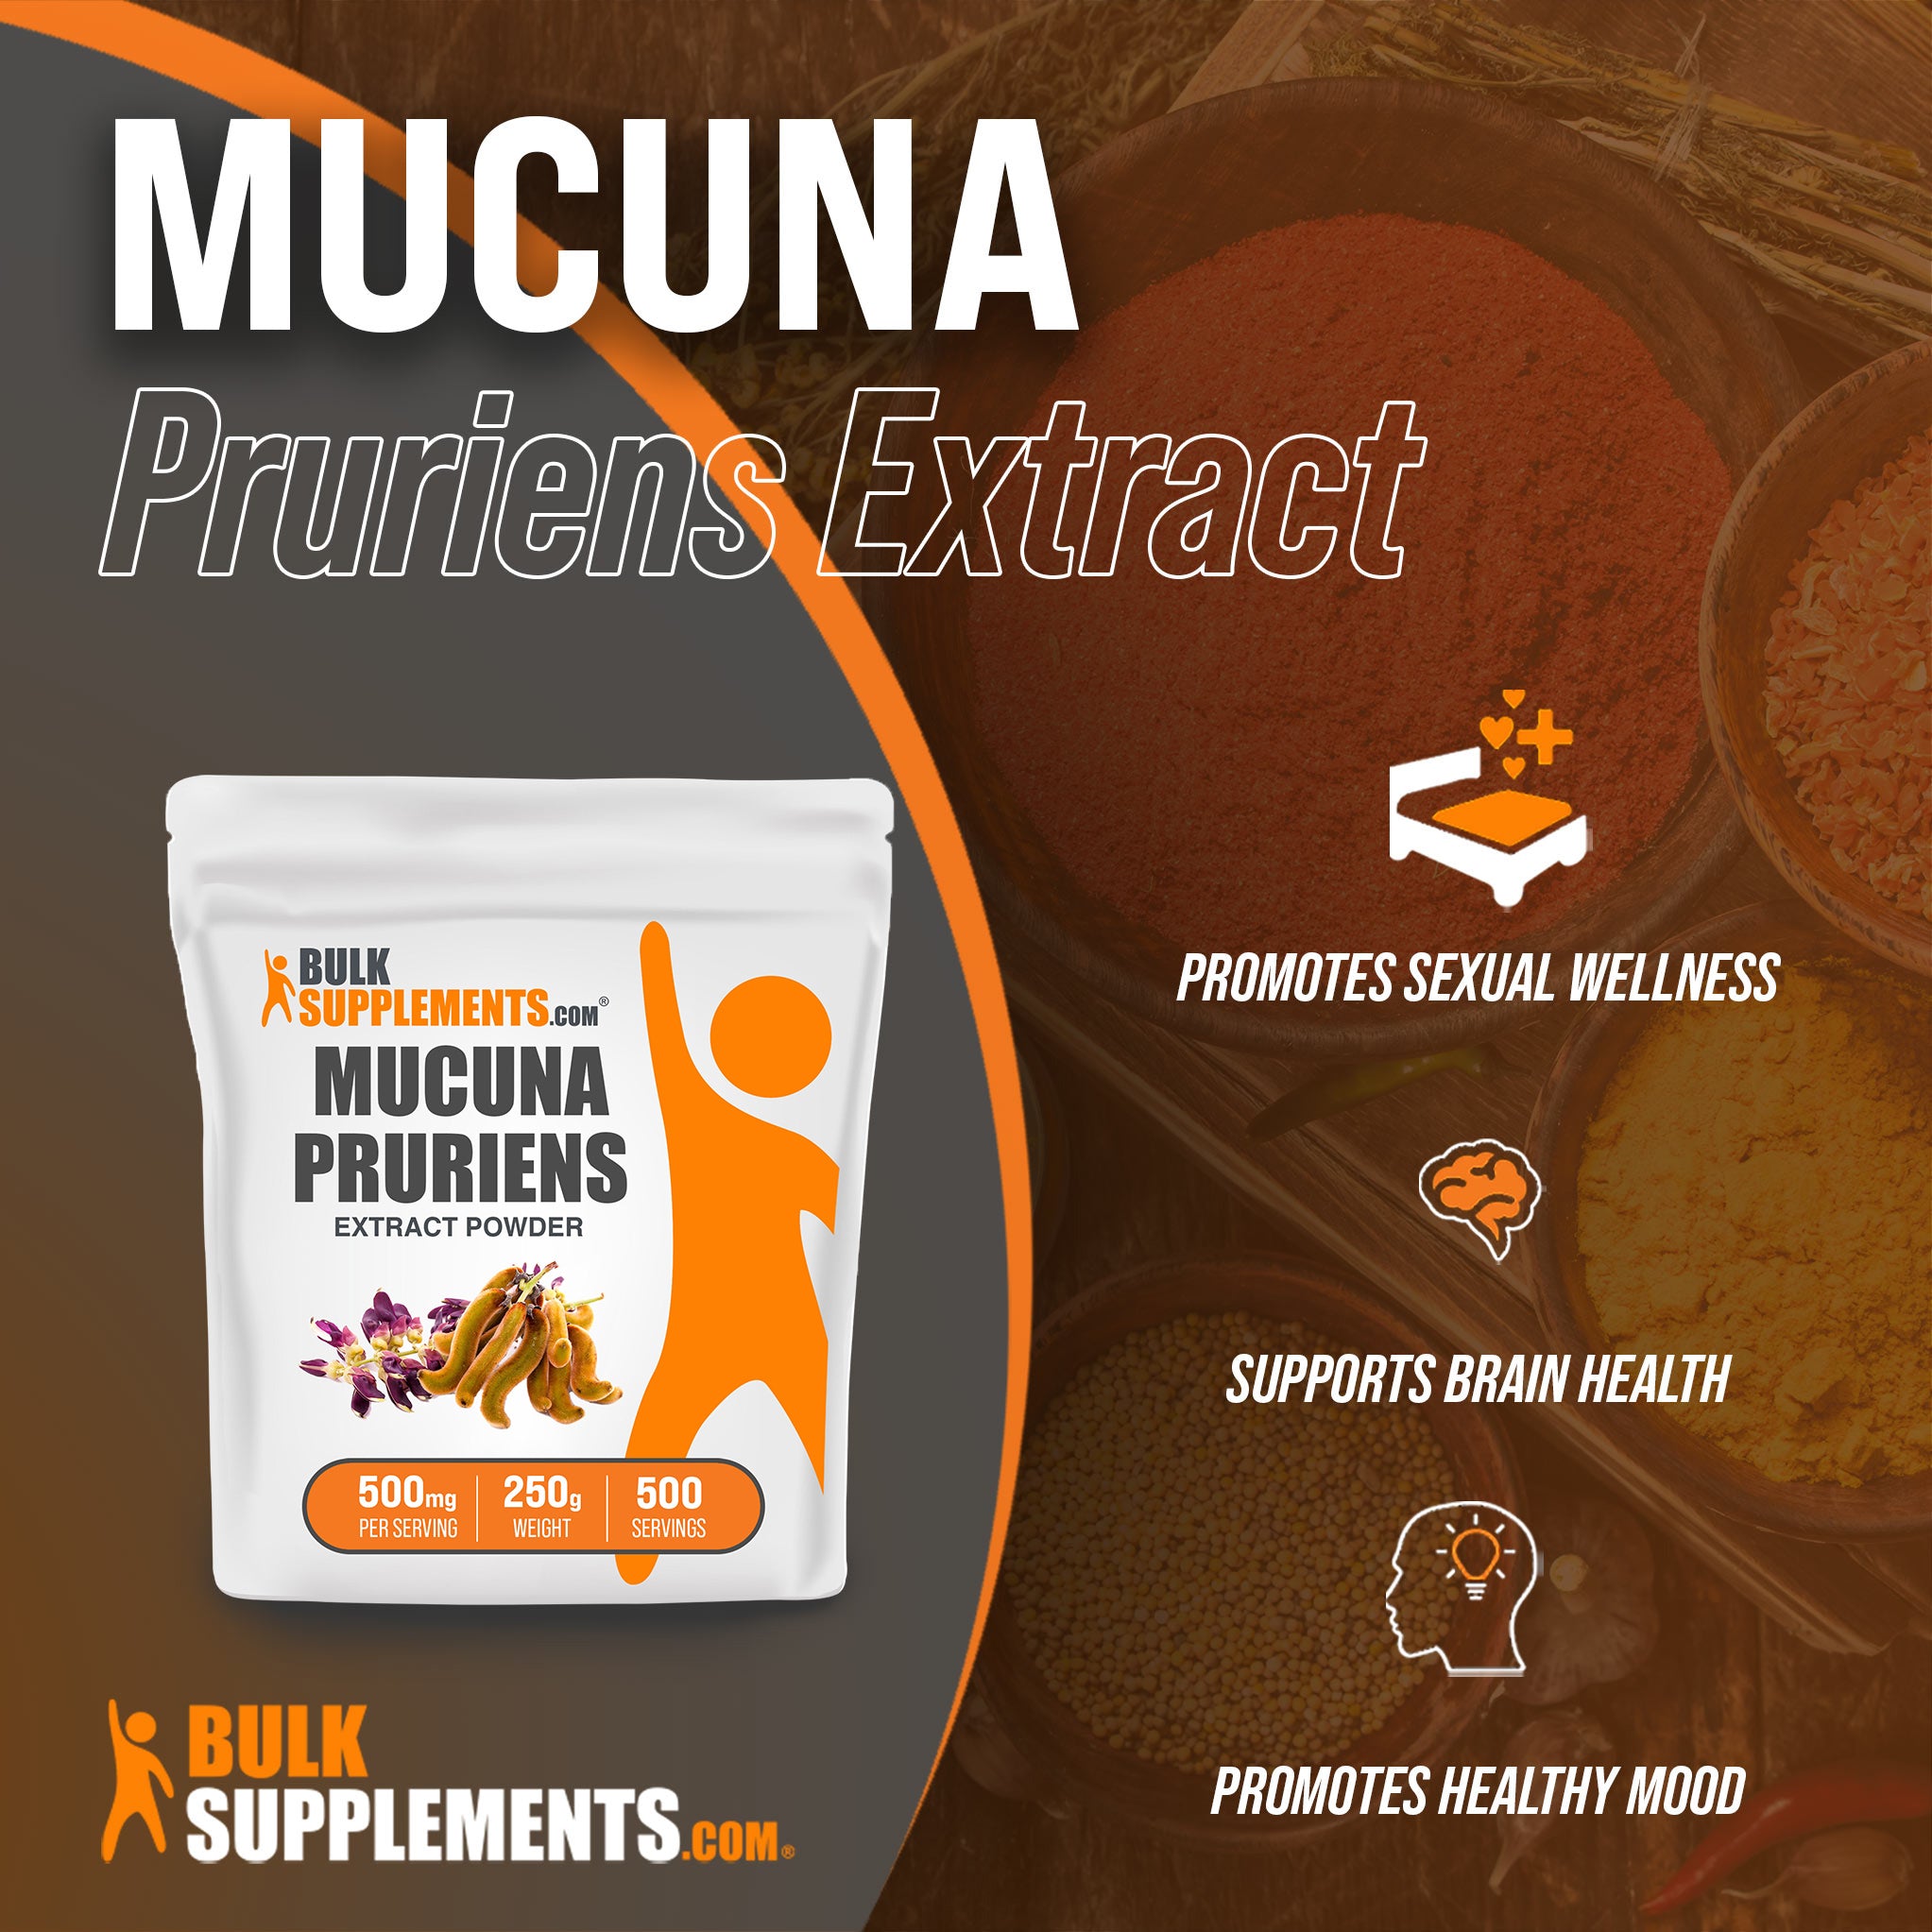 Benefits of Mucuna Pruriens Extract: promotes sexual wellness, supports brain health, promotes healthy mood